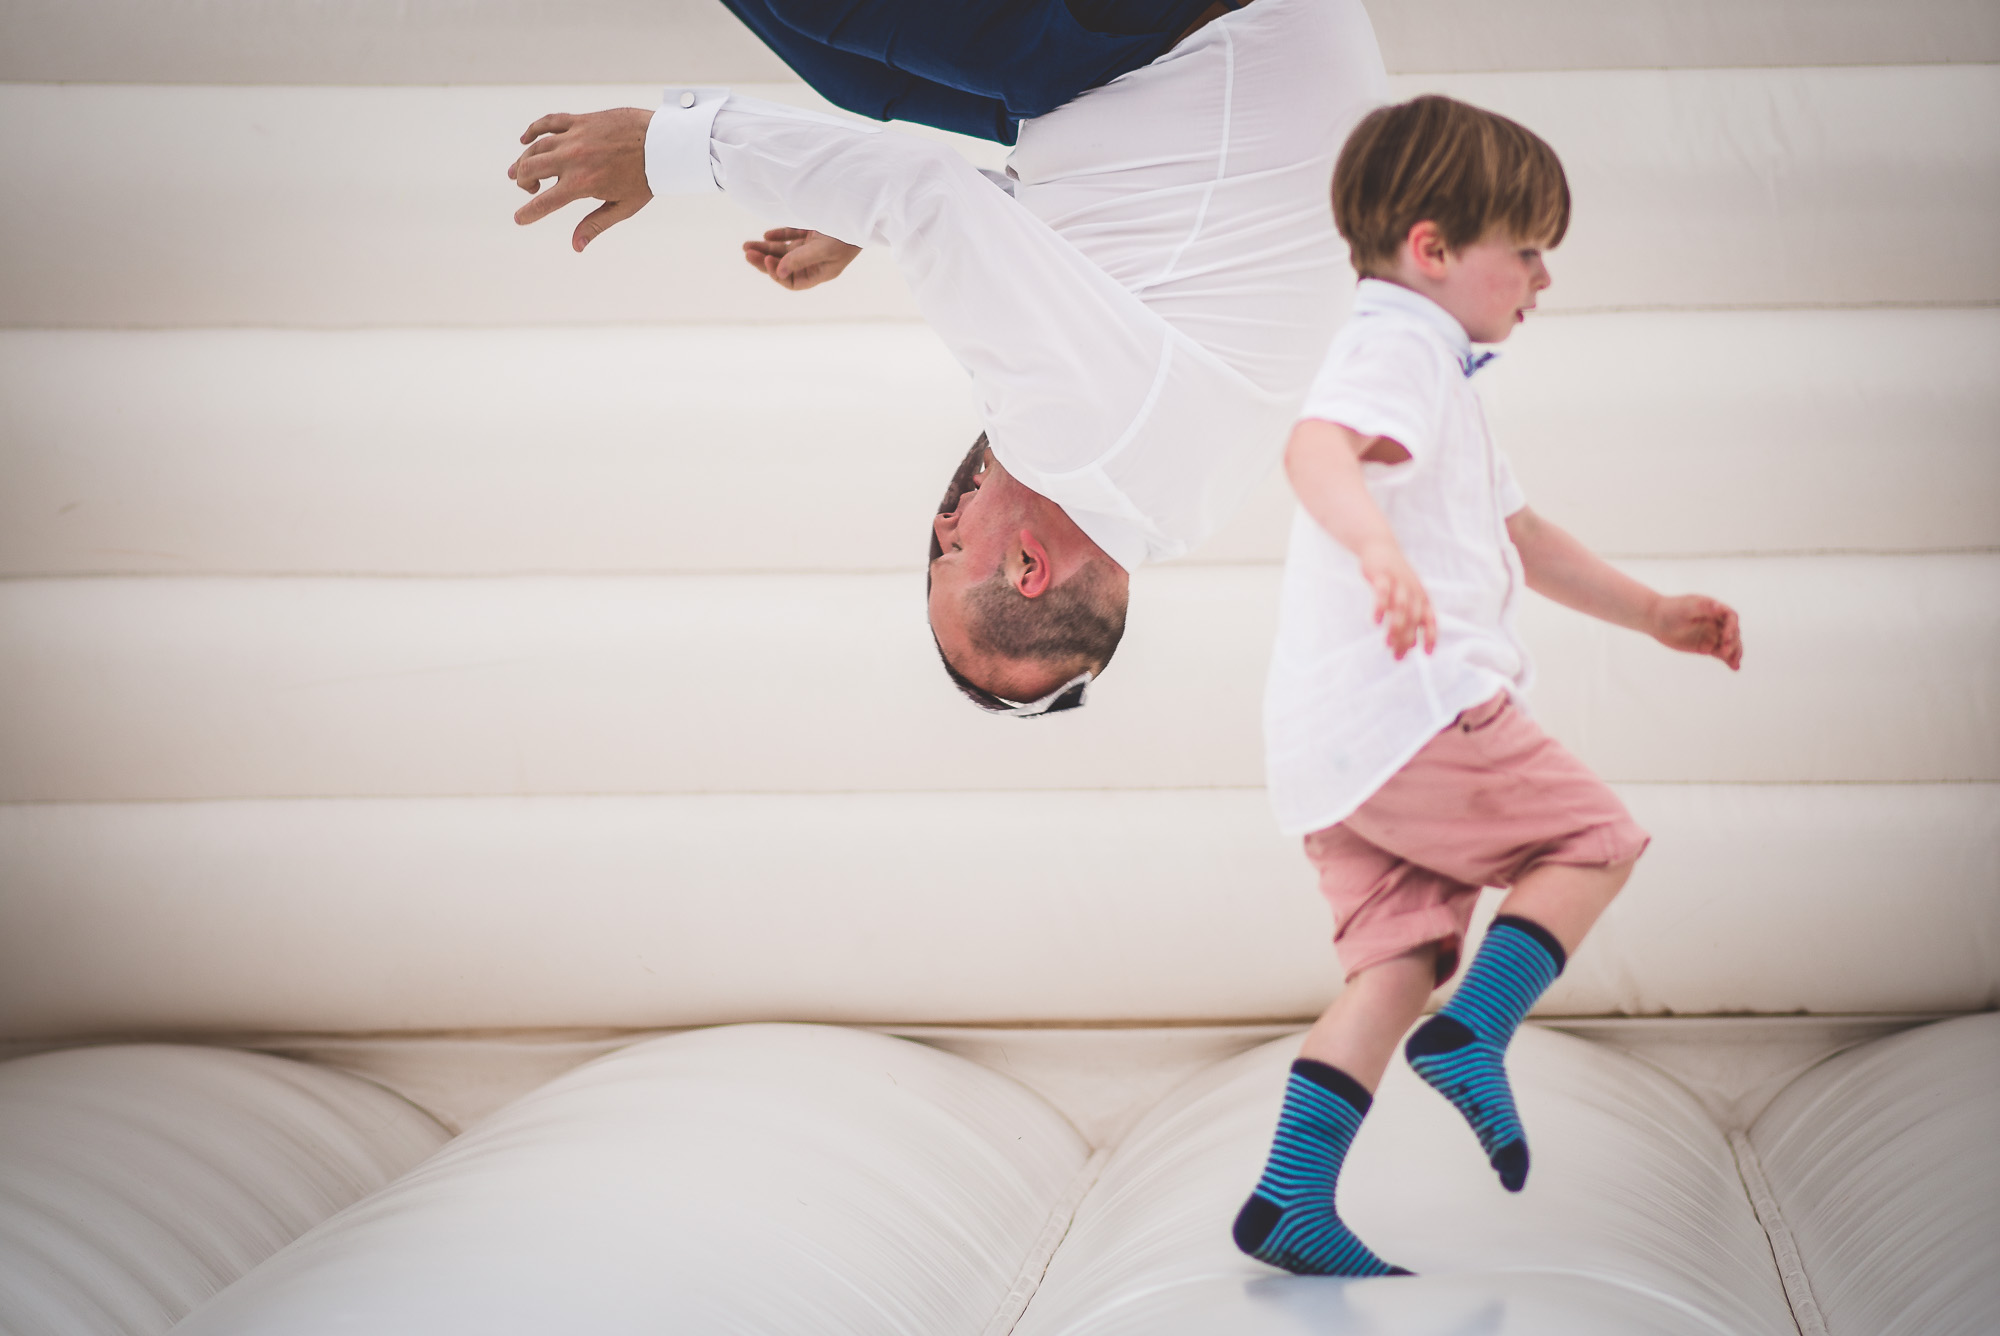 A groom and child enjoy a playful moment on a trampoline.